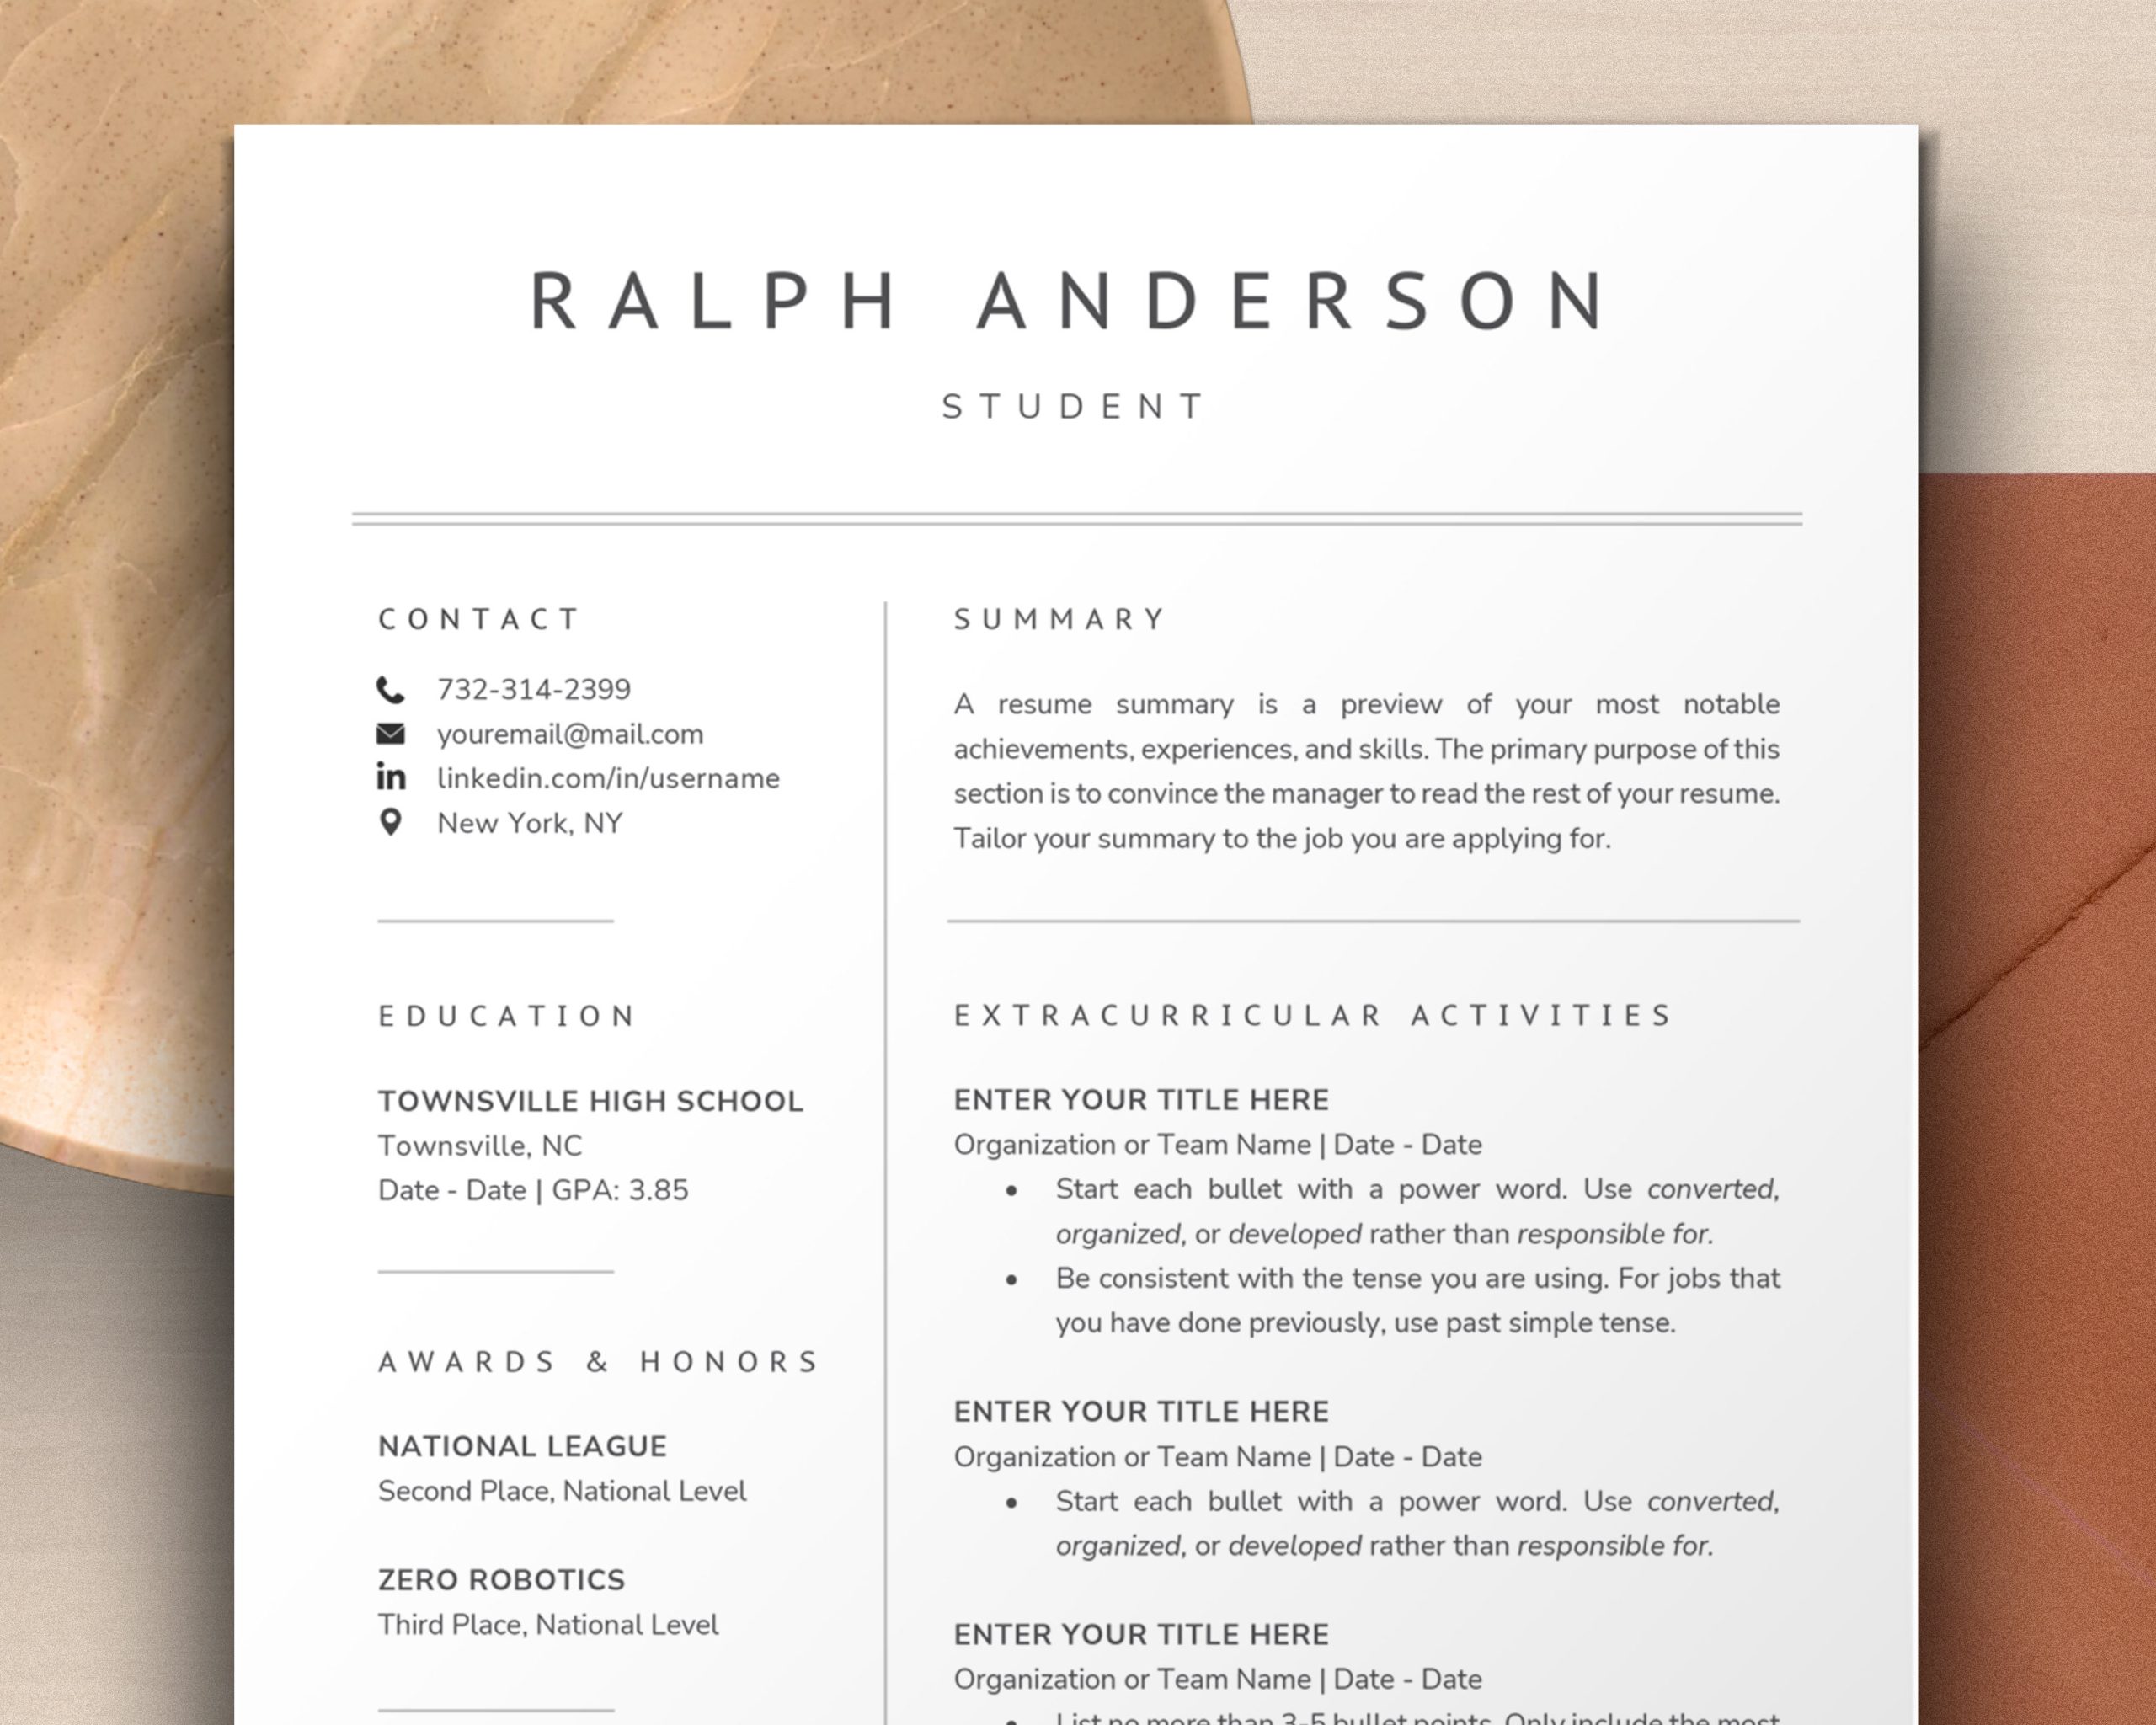 Sample National Democratic Institute Job Resume Student with No Experience Resume Template for Grad School – Etsy